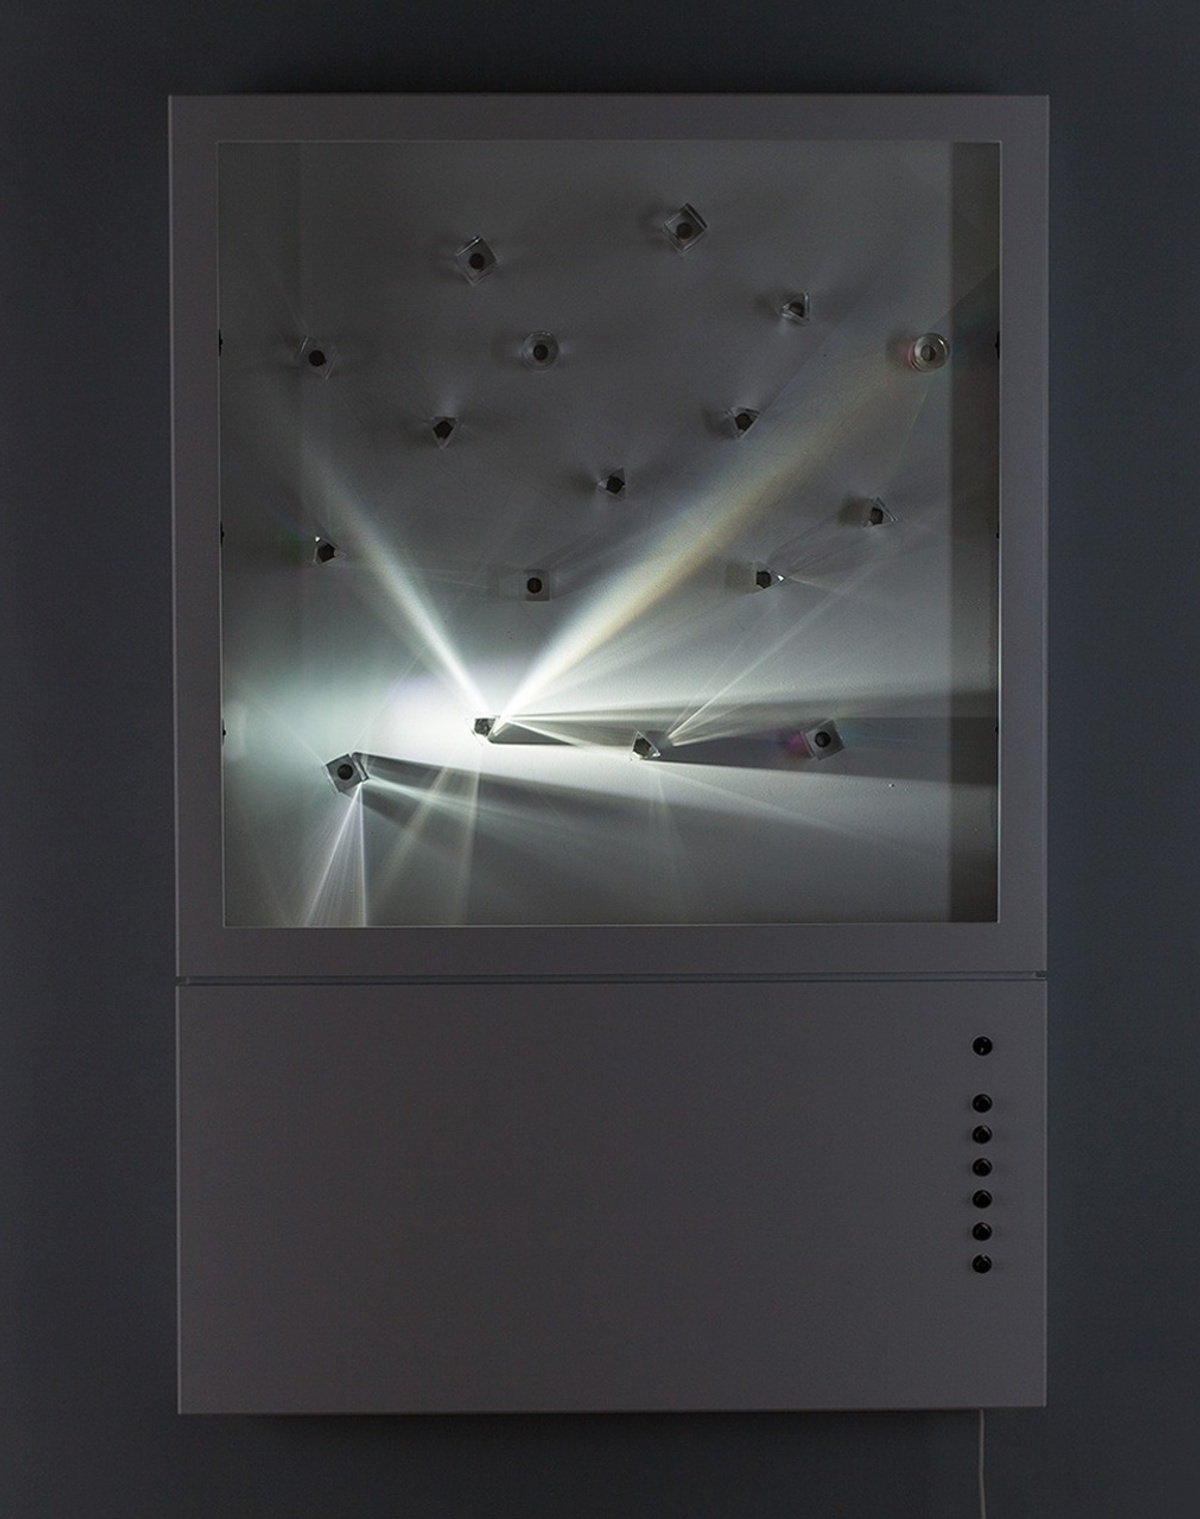 A rectangular device containing a blank "canvas", transparent prisms and one light that emits from one point in the frame, creating angular rays of white light to disperse outward